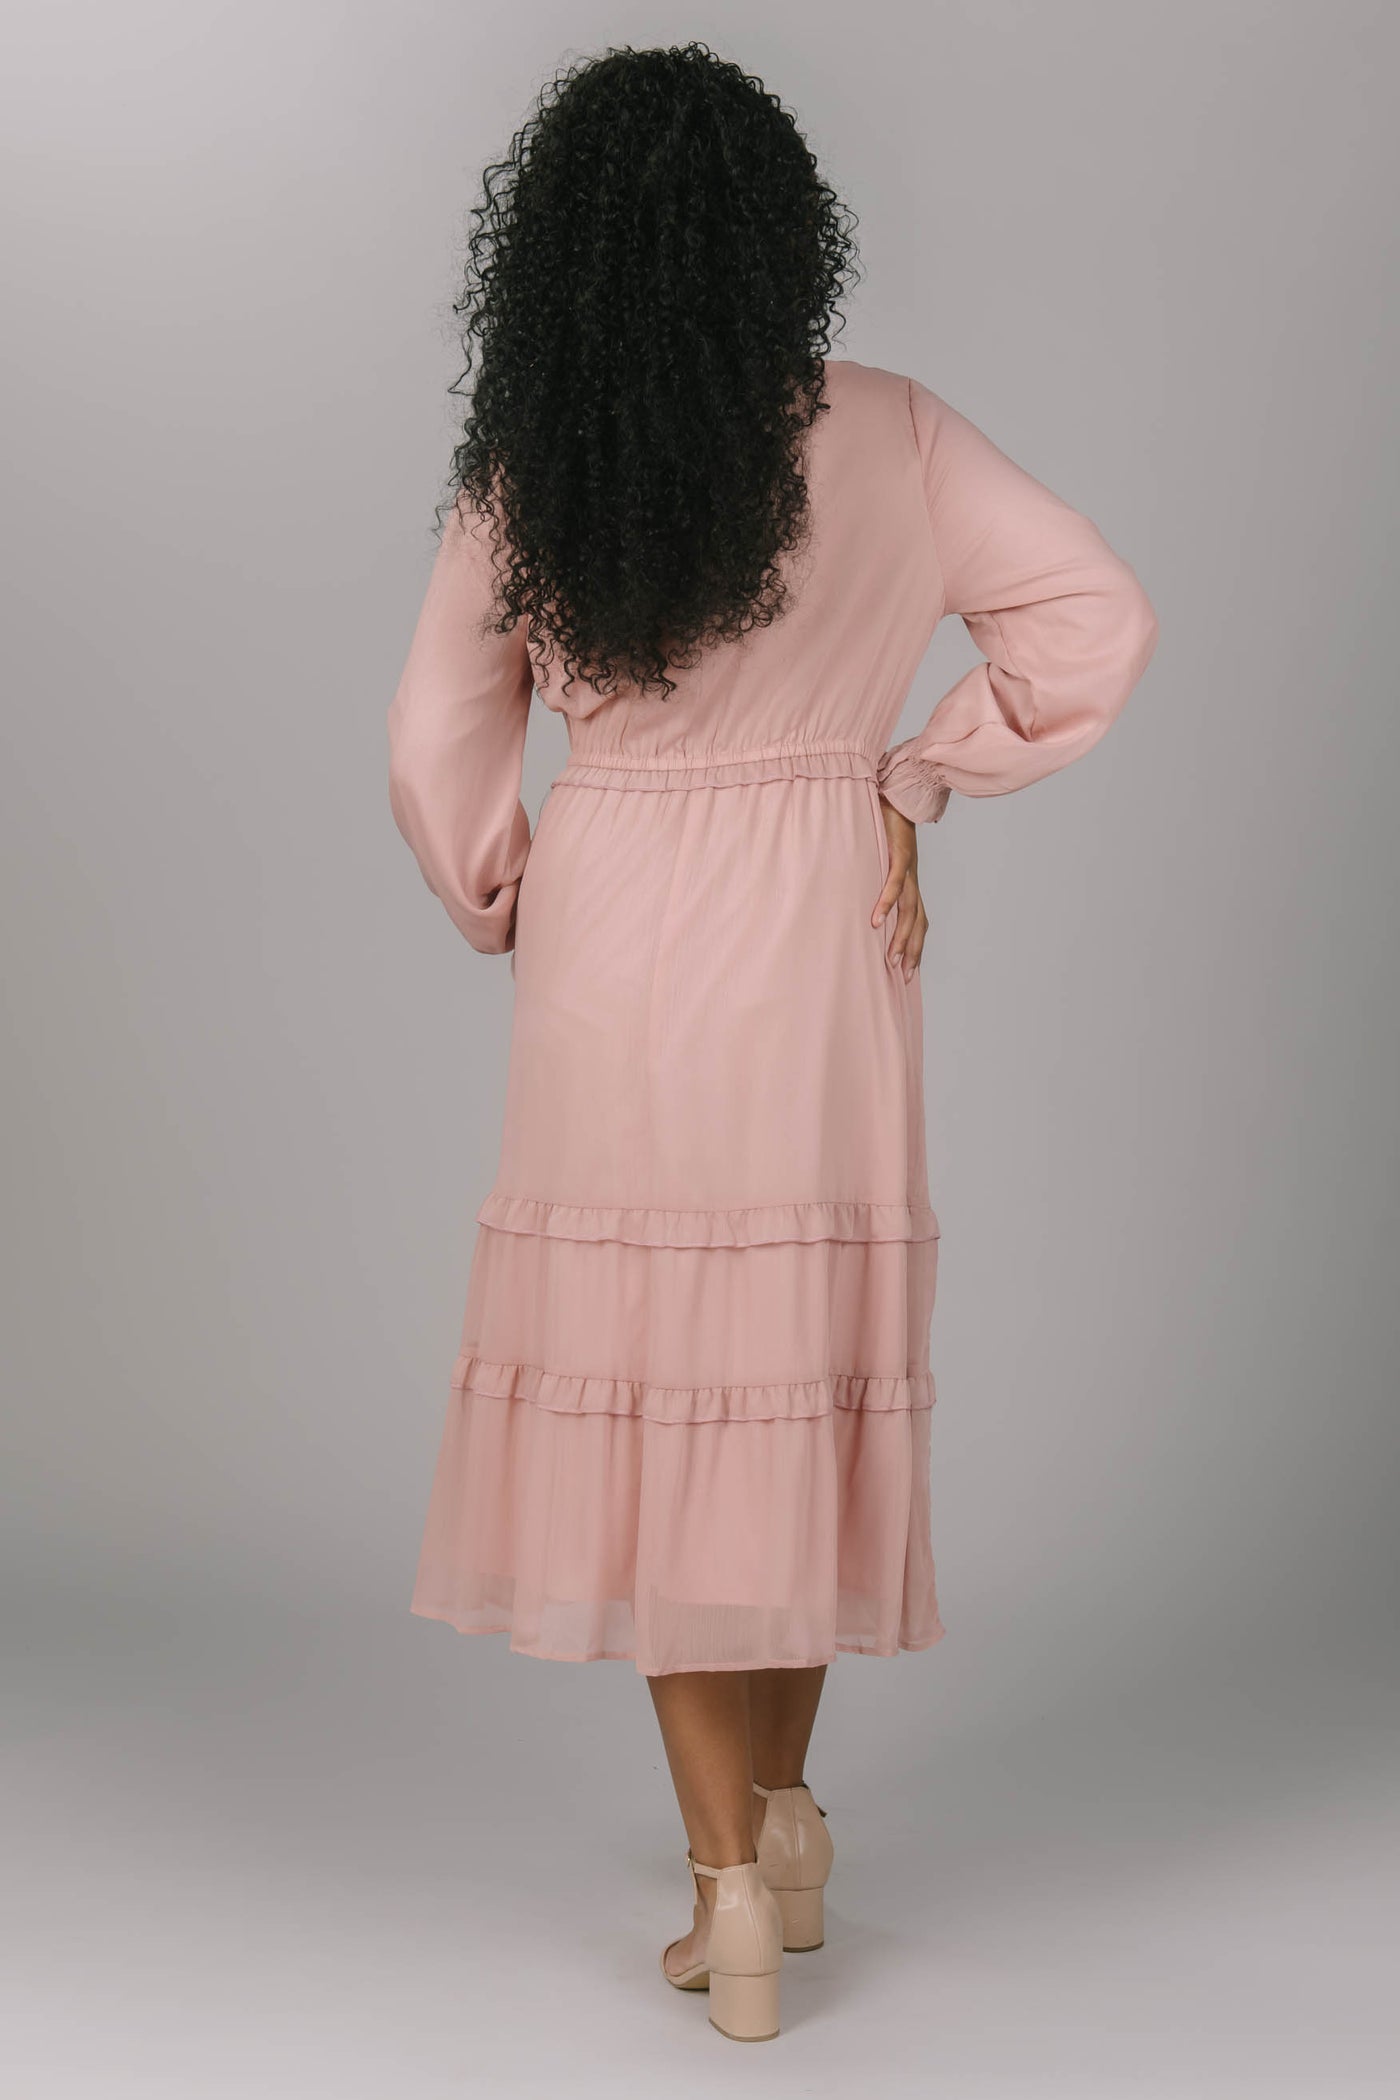 Back view of pink modest dress with long sleeves. It is tiered with buttons down the top of the dress. The modest bridesmaid would fall in love with this dress.